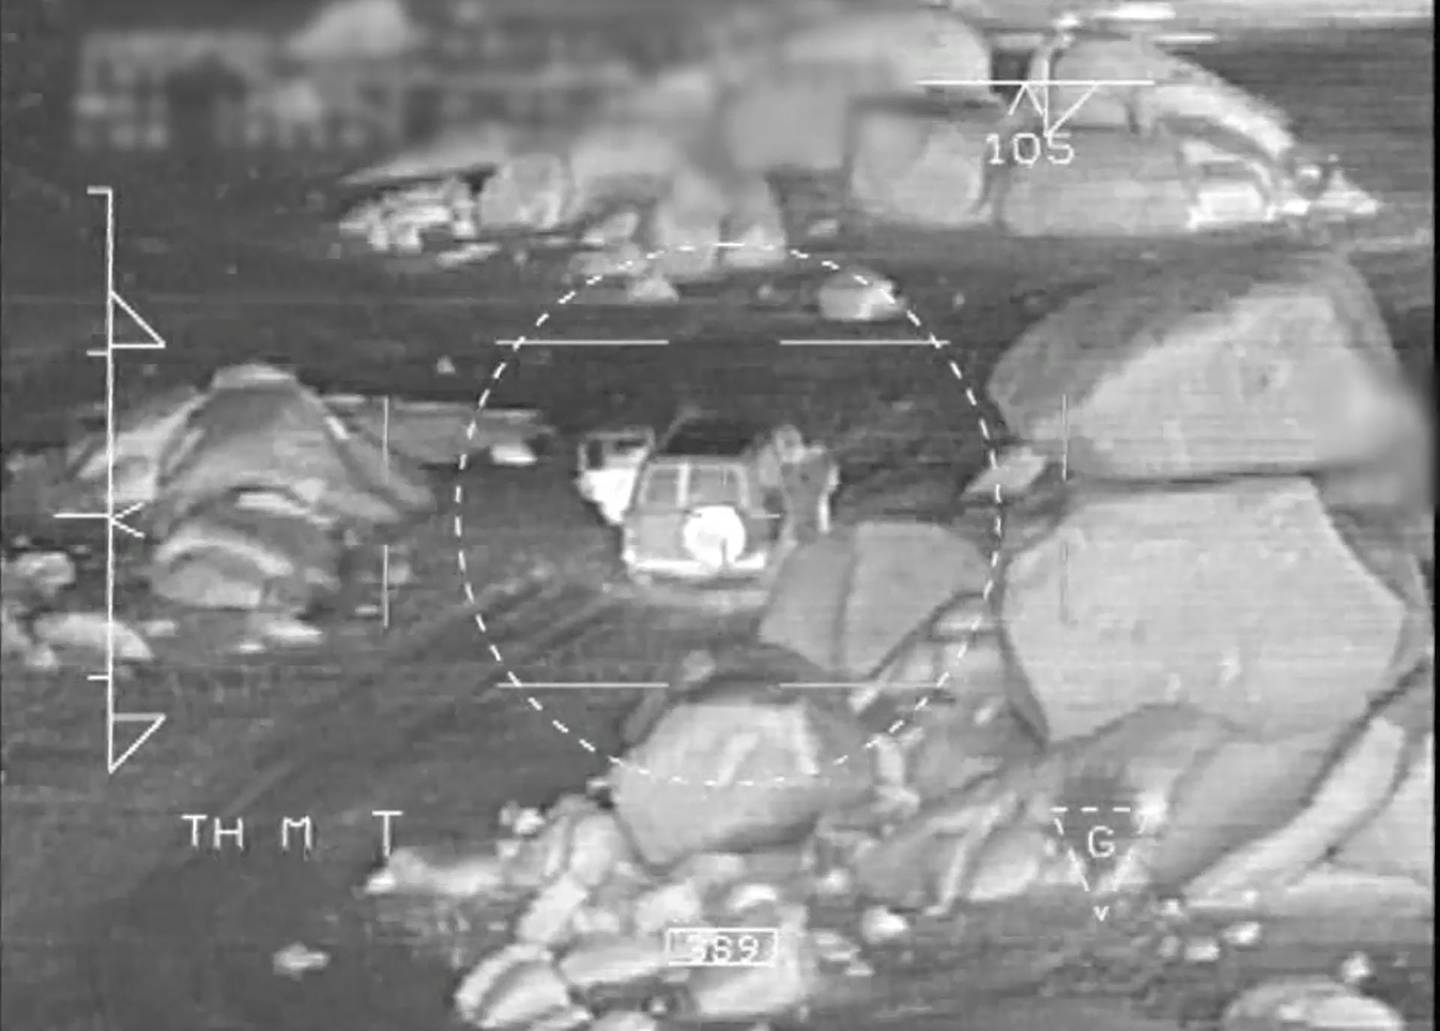 This handout photo released by the French Army General Staff (Etat-Major des Armees) on June 11, 2020, shows an aerial view of a vehicle during a French military operation that led to the killing of the head of Al-Qaeda in the Islamic Maghreb (AQIM) Abdelmalek Droukdel in northwest Mali on June 3, 2020. Abdelmalek Droukdel was killed by French troops on June 4, 2020, in northern Mali near the Algerian border, where the group has bases it uses to carry out bombings and abductions of Westerners, the French Defence minister said. The military intervention in broad daylight concluded about ten kilometres (6,2 miles) from the Algerian border, east of the Malian town of Tessalit.
 - RESTRICTED TO EDITORIAL USE - MANDATORY CREDIT "AFP PHOTO / ETAT-MAJOR DES ARMEES" - NO MARKETING NO ADVERTISING CAMPAIGNS - DISTRIBUTED AS A SERVICE TO CLIENTS


 / AFP / Etat-Major des Armees / - / RESTRICTED TO EDITORIAL USE - MANDATORY CREDIT "AFP PHOTO / ETAT-MAJOR DES ARMEES" - NO MARKETING NO ADVERTISING CAMPAIGNS - DISTRIBUTED AS A SERVICE TO CLIENTS


